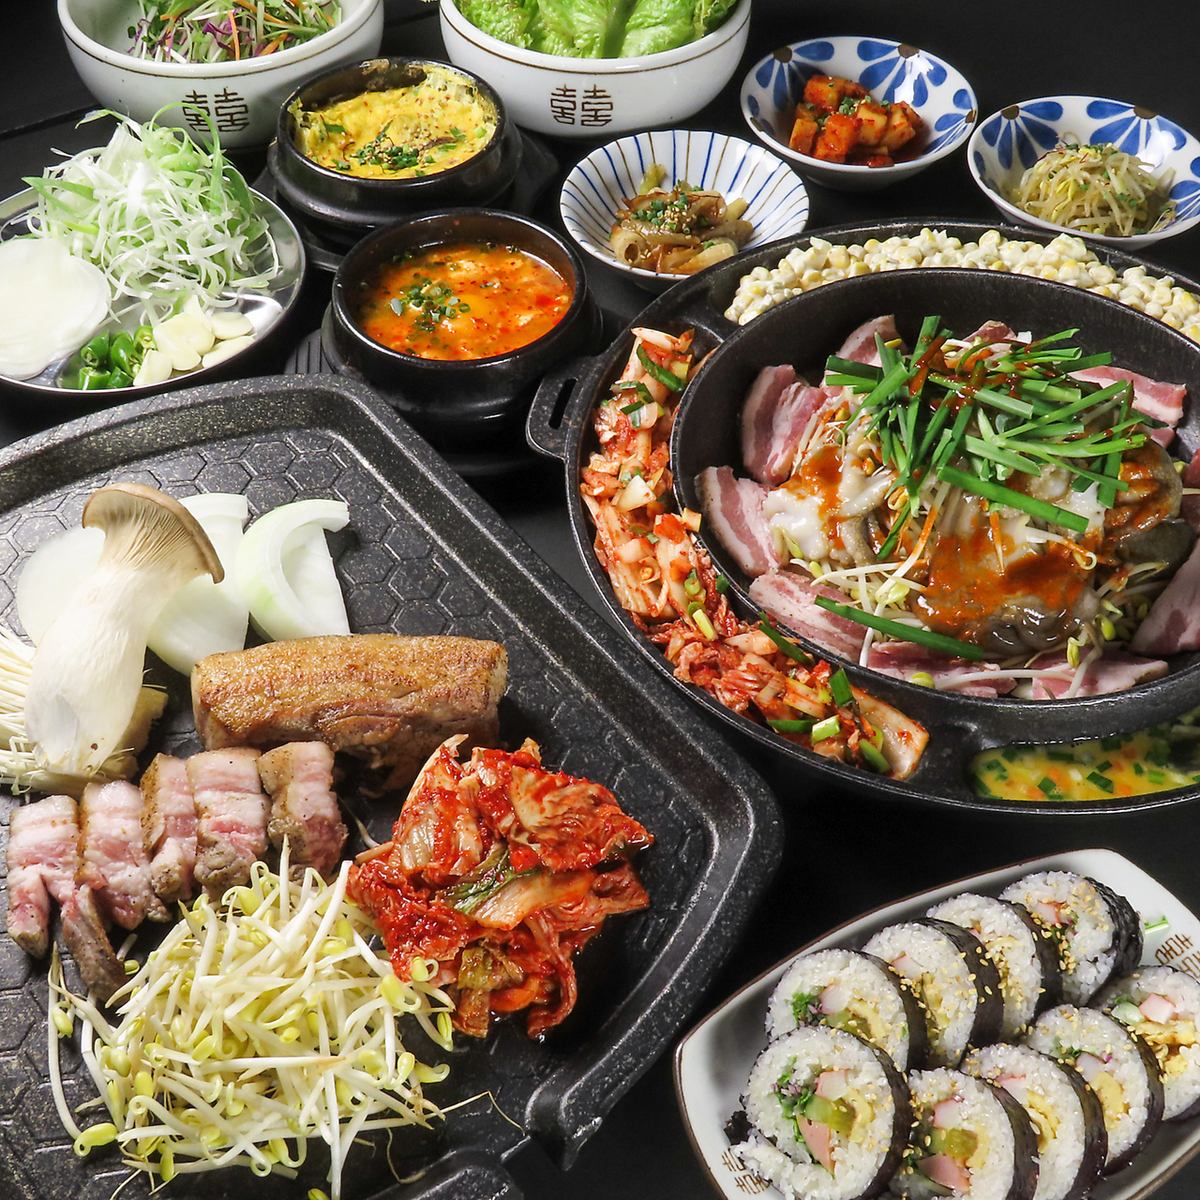 Enjoy authentic Korean flavors such as the classic samgyeopsal and the popular cheese dakgalbi♪